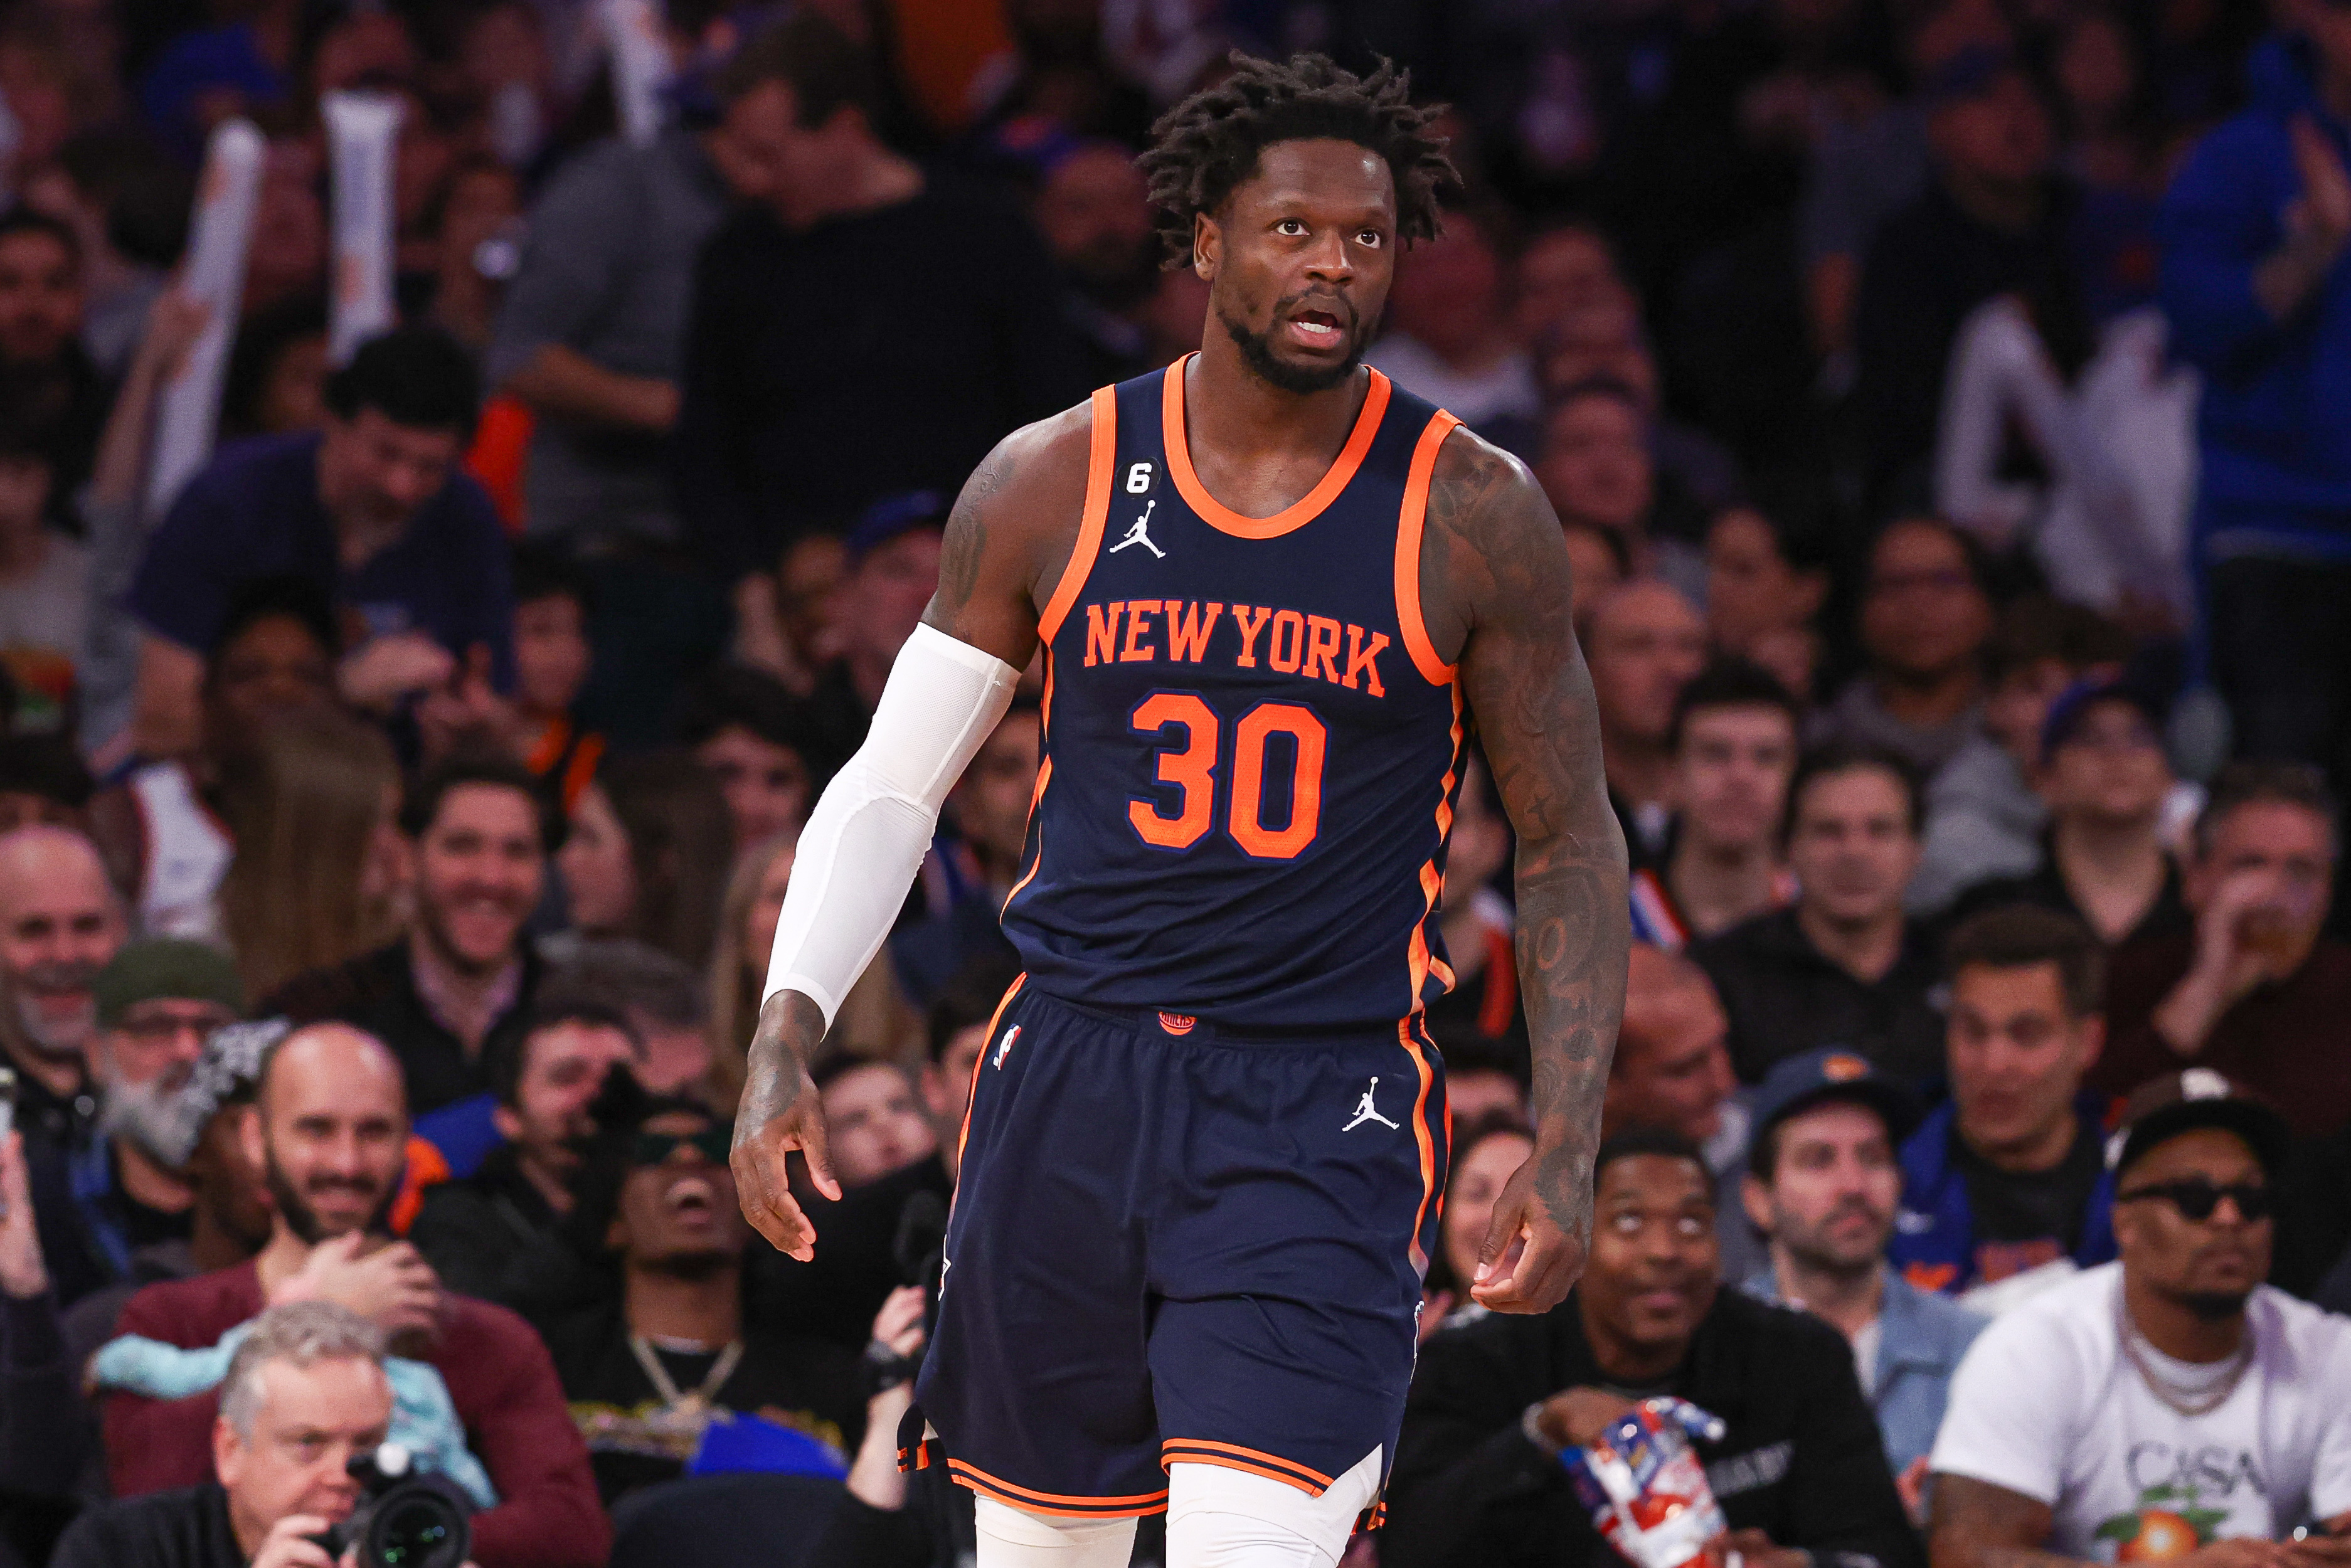 New York Knicks forward Julius Randle (30) reacts after a basket against the Toronto Raptors during the first half at Madison Square Garden.